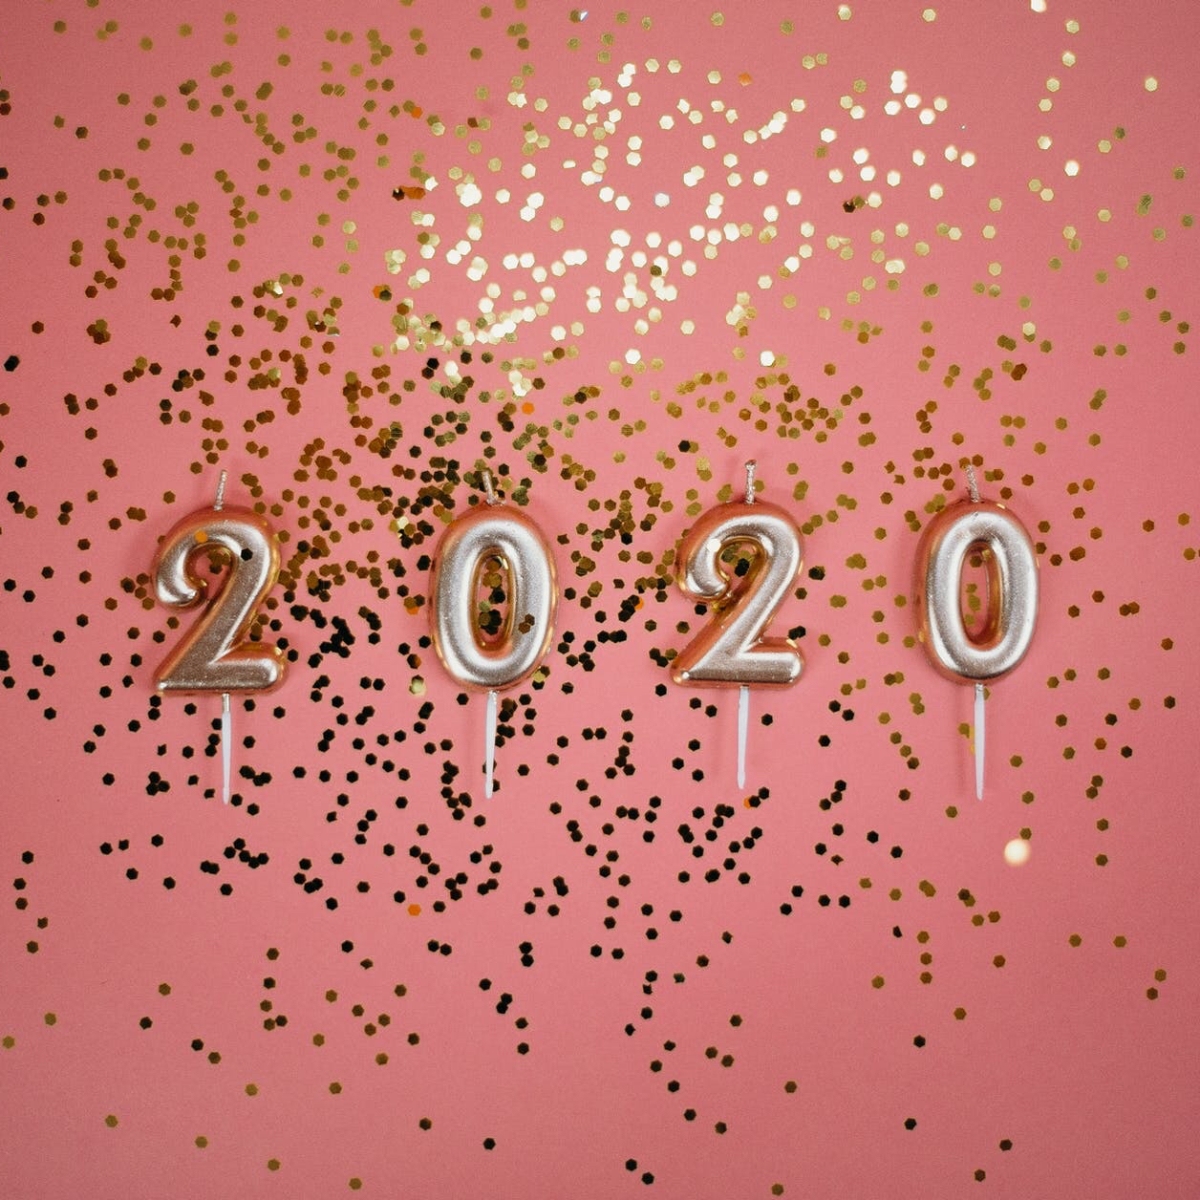 🎆✨HAPPY NEW YEAR! 🎉✨It’s Time for 2020 Visions!!